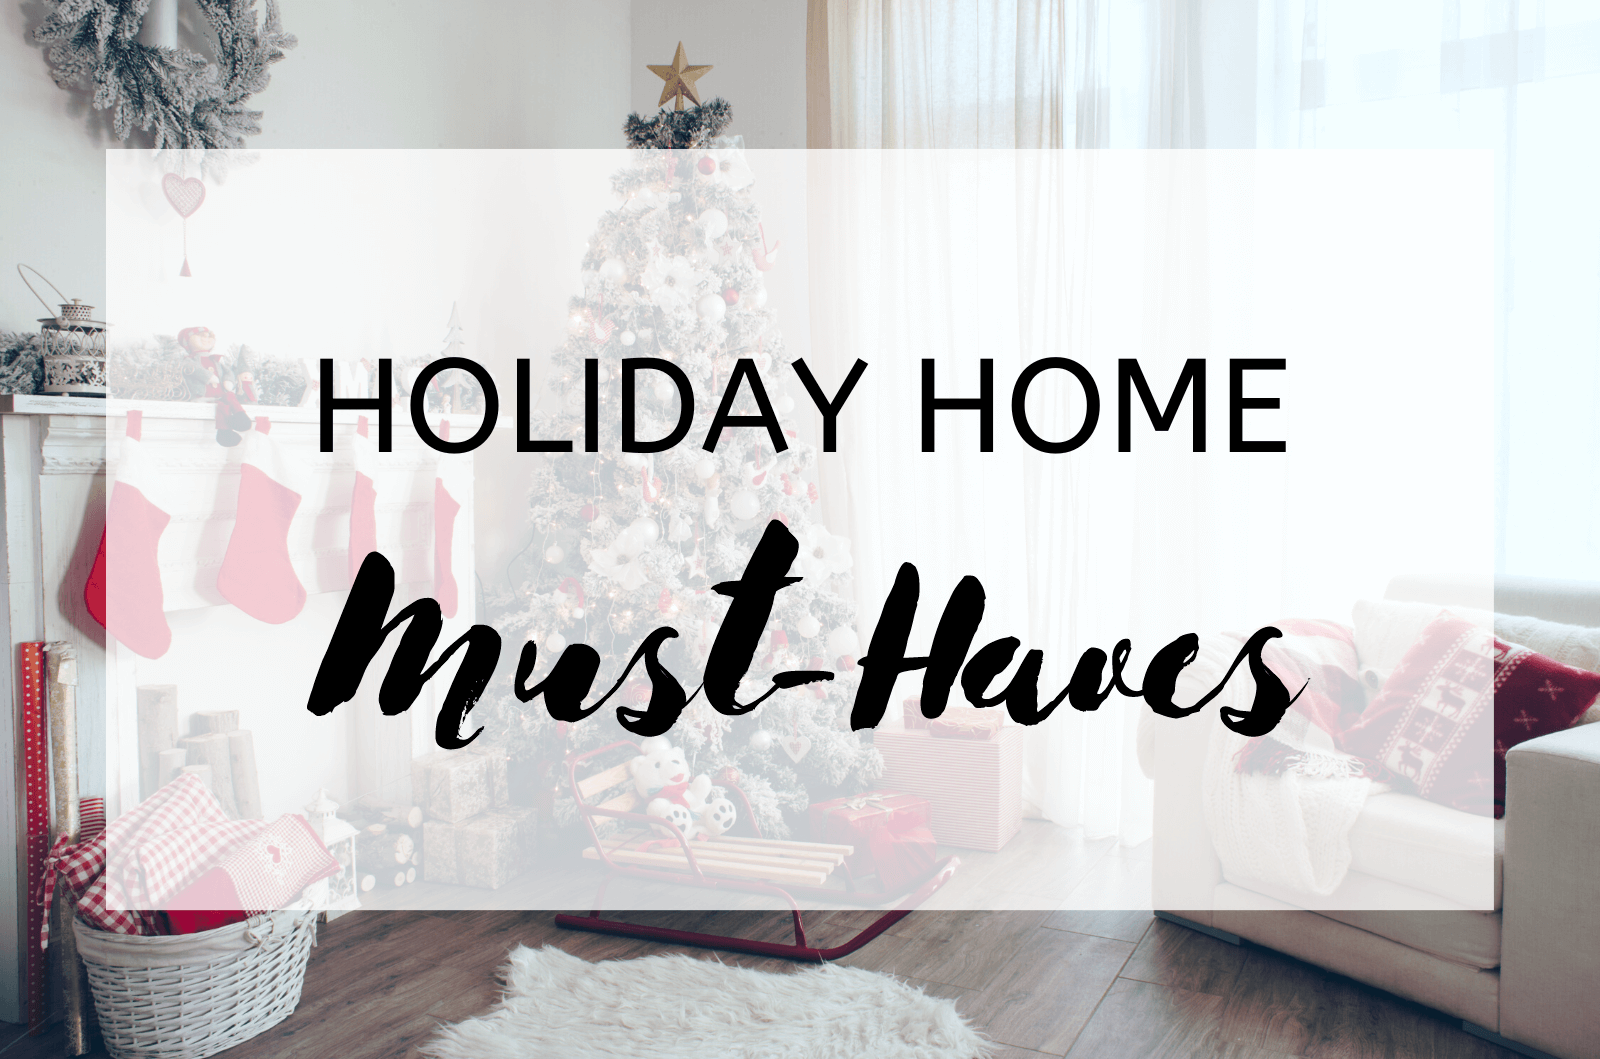 Holiday Home Must-Haves